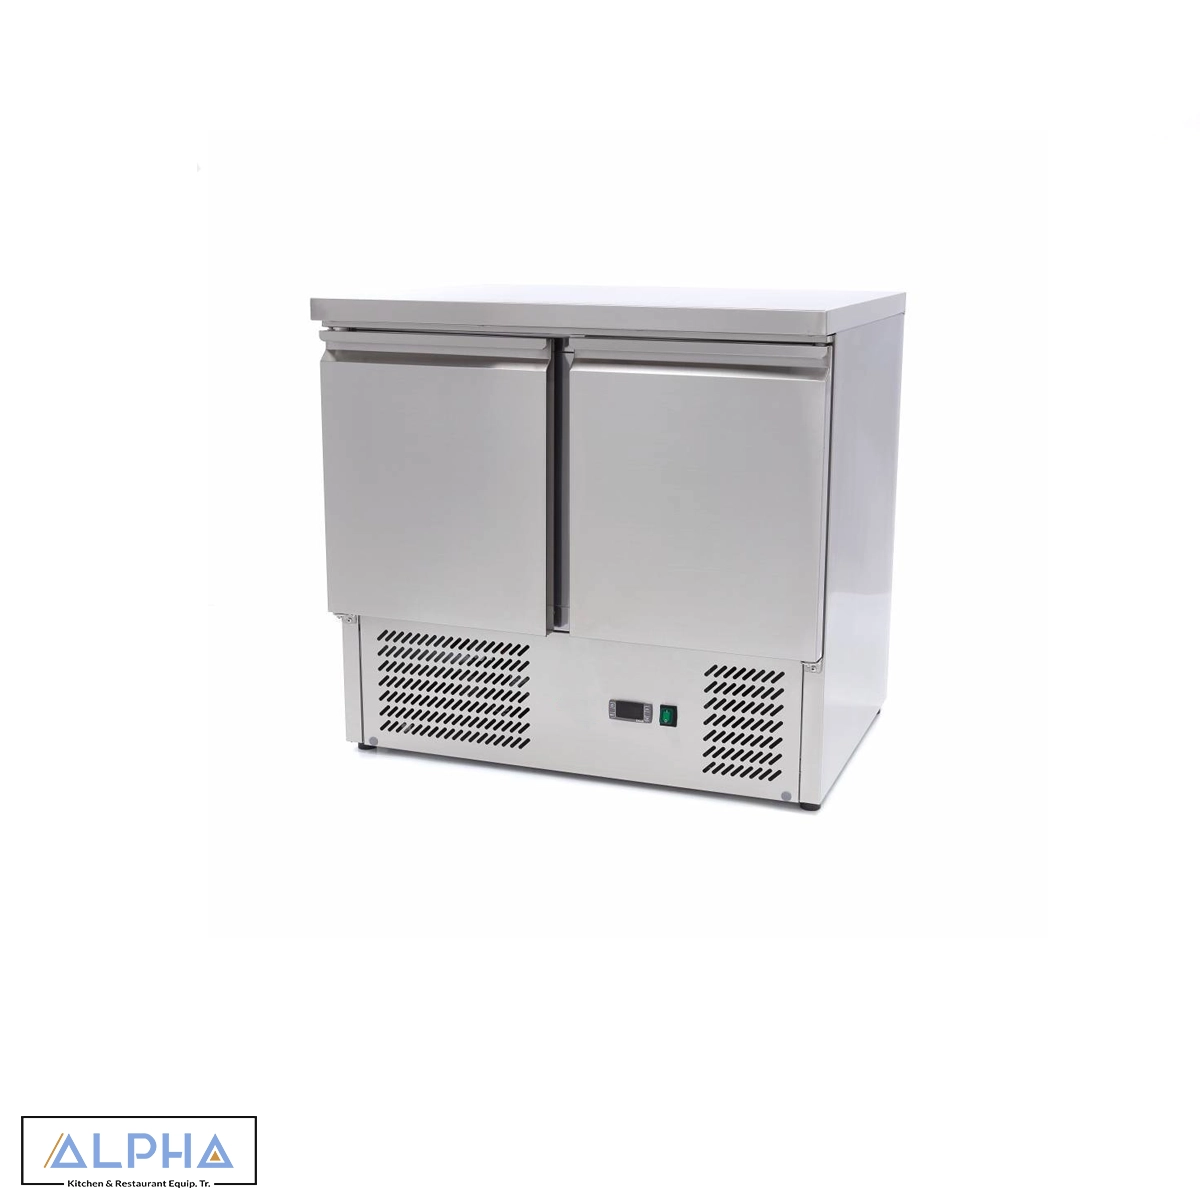 Refrigerated Pizza Table European Stainless Steel Commercial Refrigerator  Saladette - China Refrigerator and Glass Door Refrigerator price